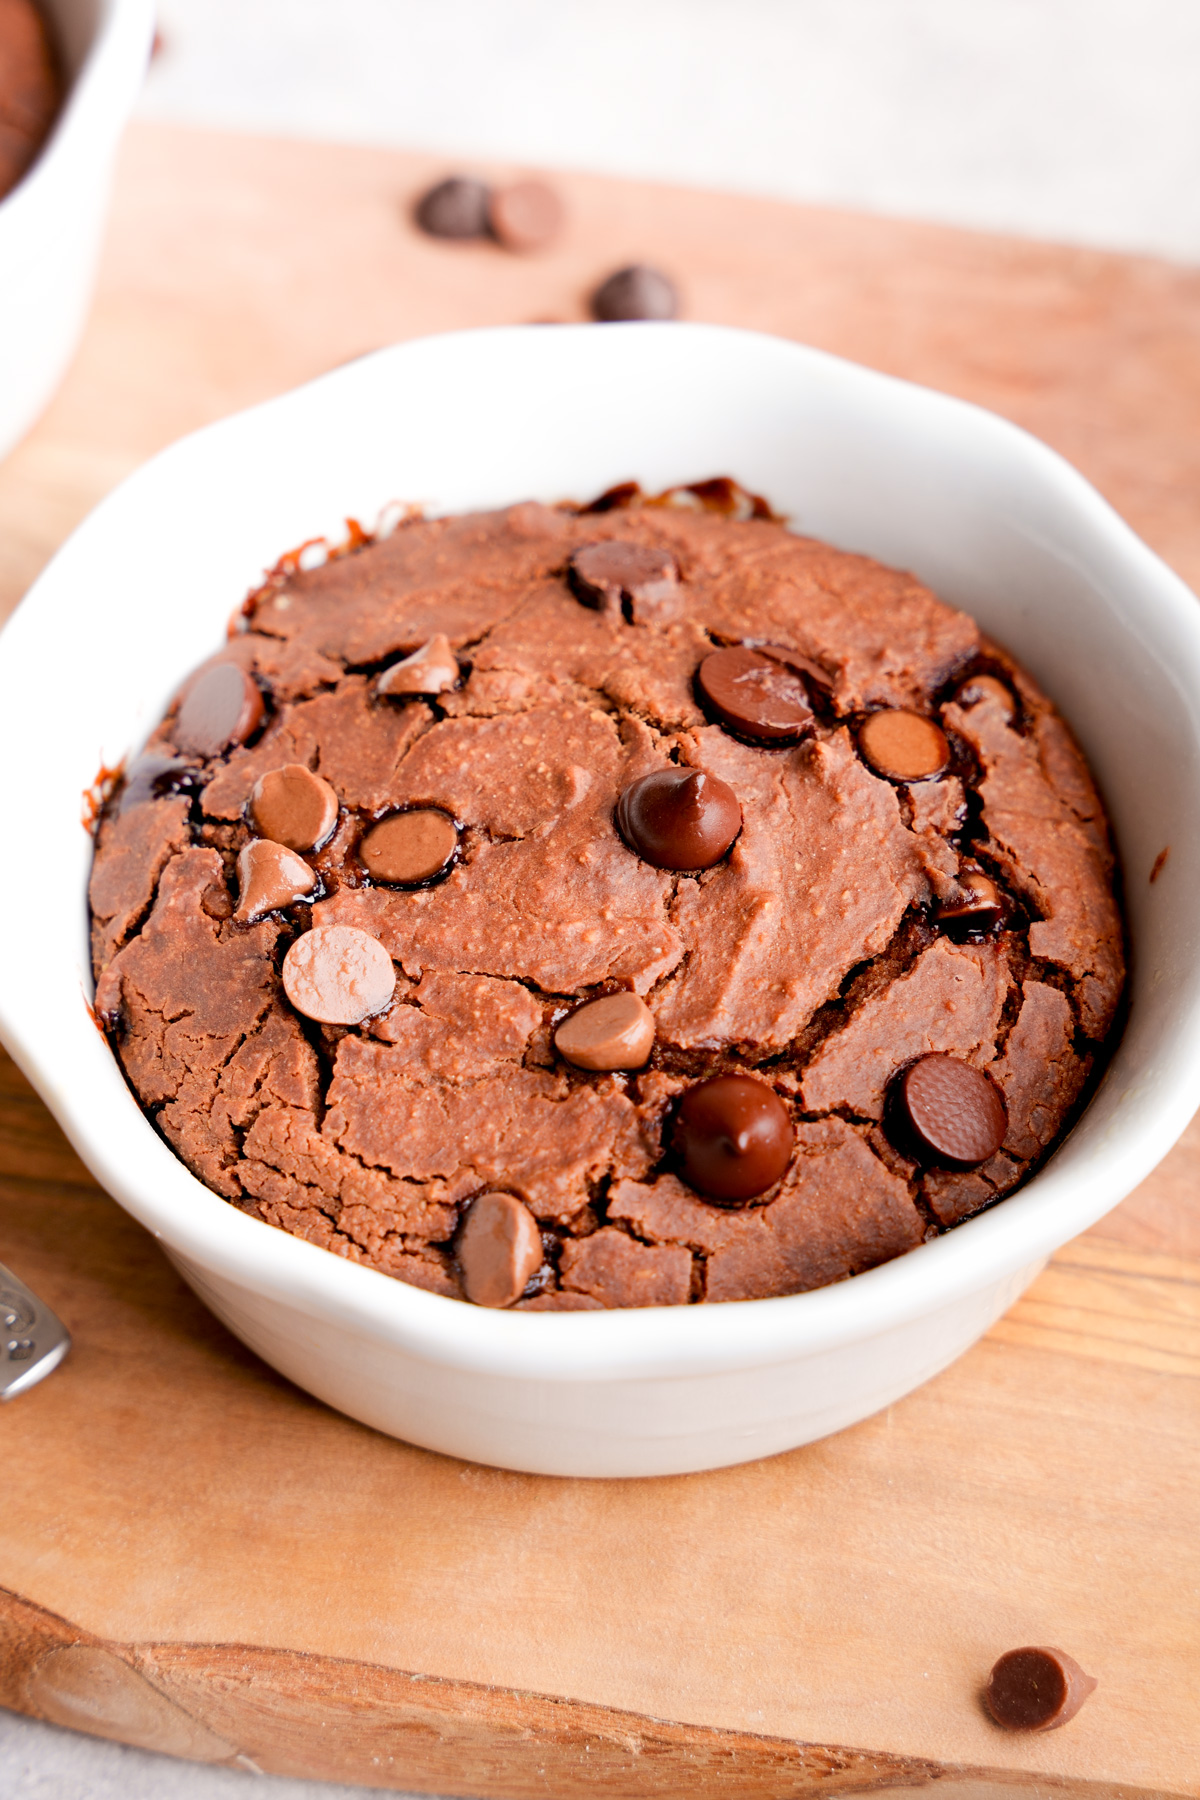 the cooked chocolate baked oats